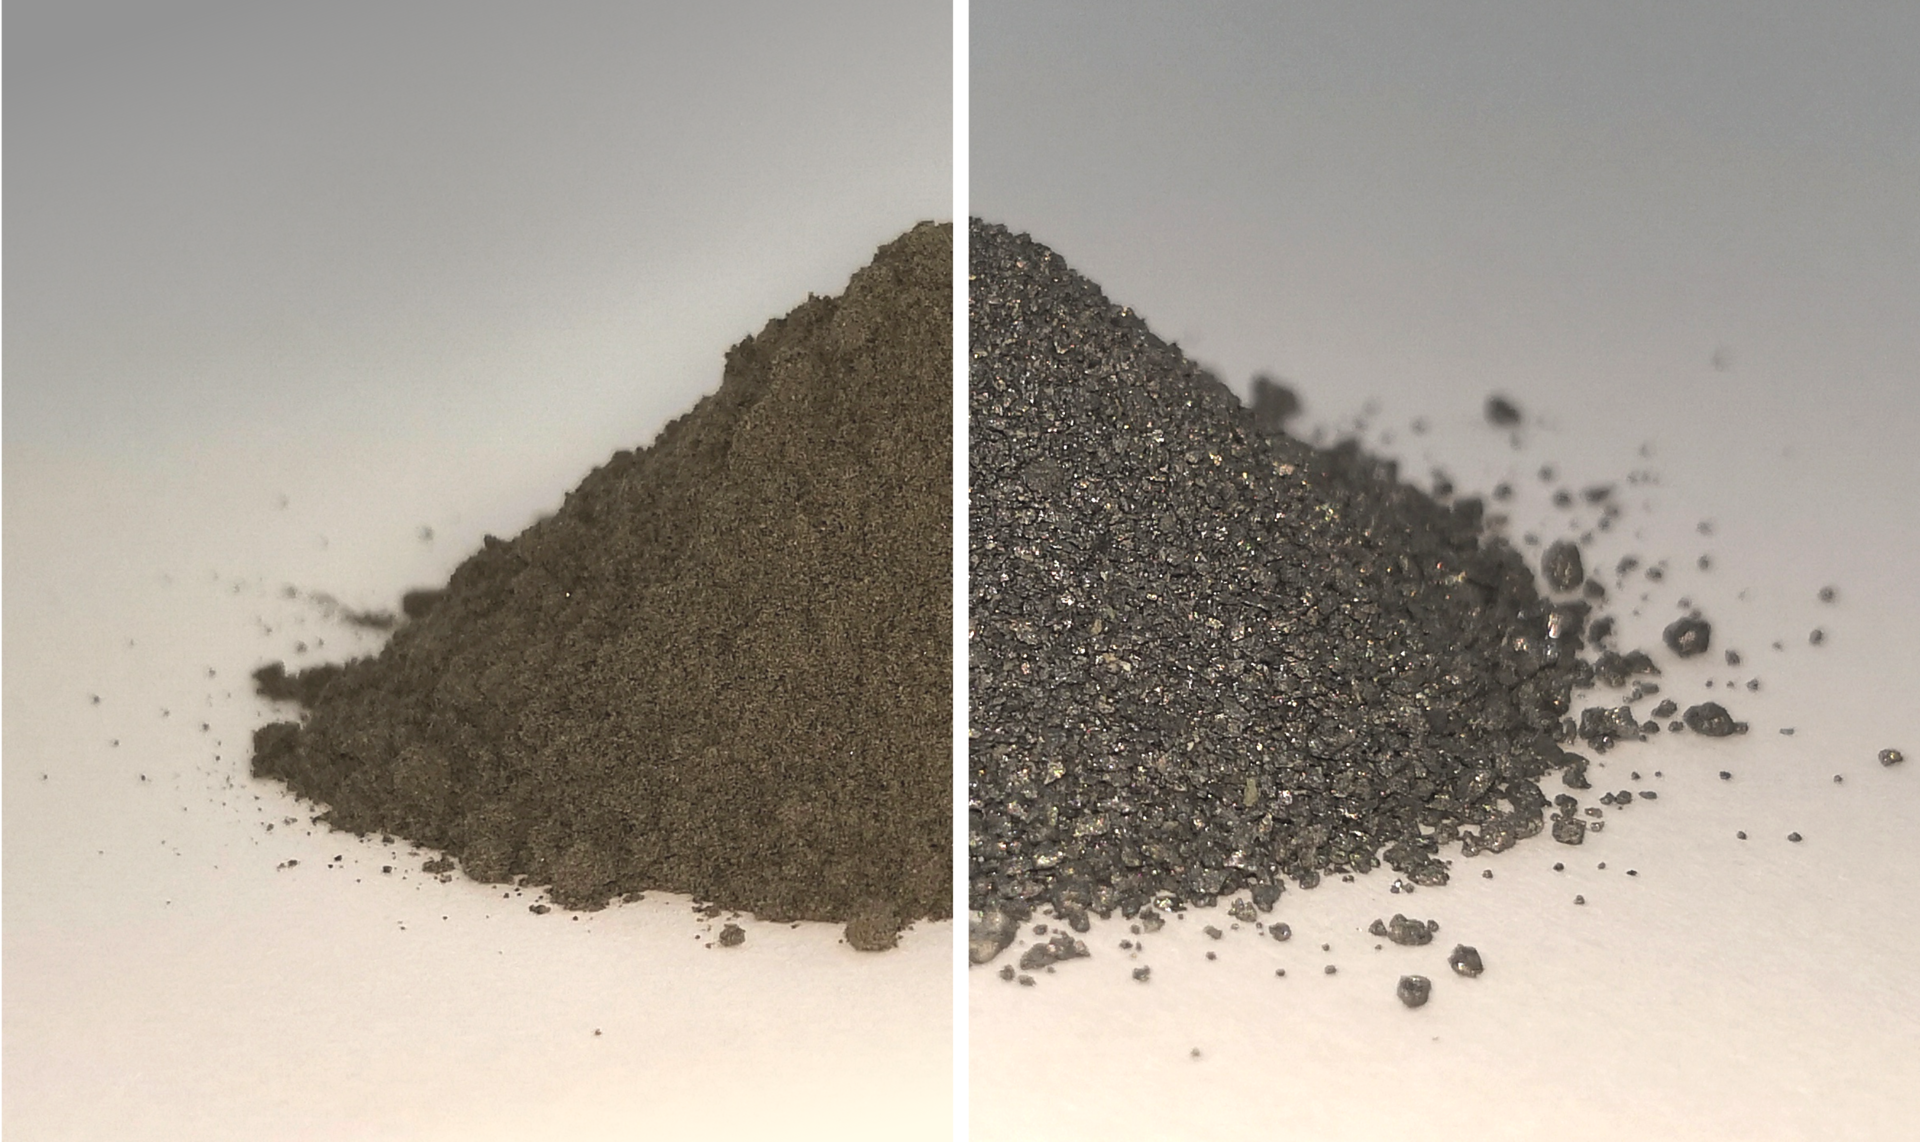 Several years ago, scientists created artificial lunar soil for tests. On the left, you see a pile of simulated regolith while on the right, you see the same pile once all the oxygen has been extracted. While we need the oxygen for survival, the metal alloys could be used by colonizers. Credit: ESA